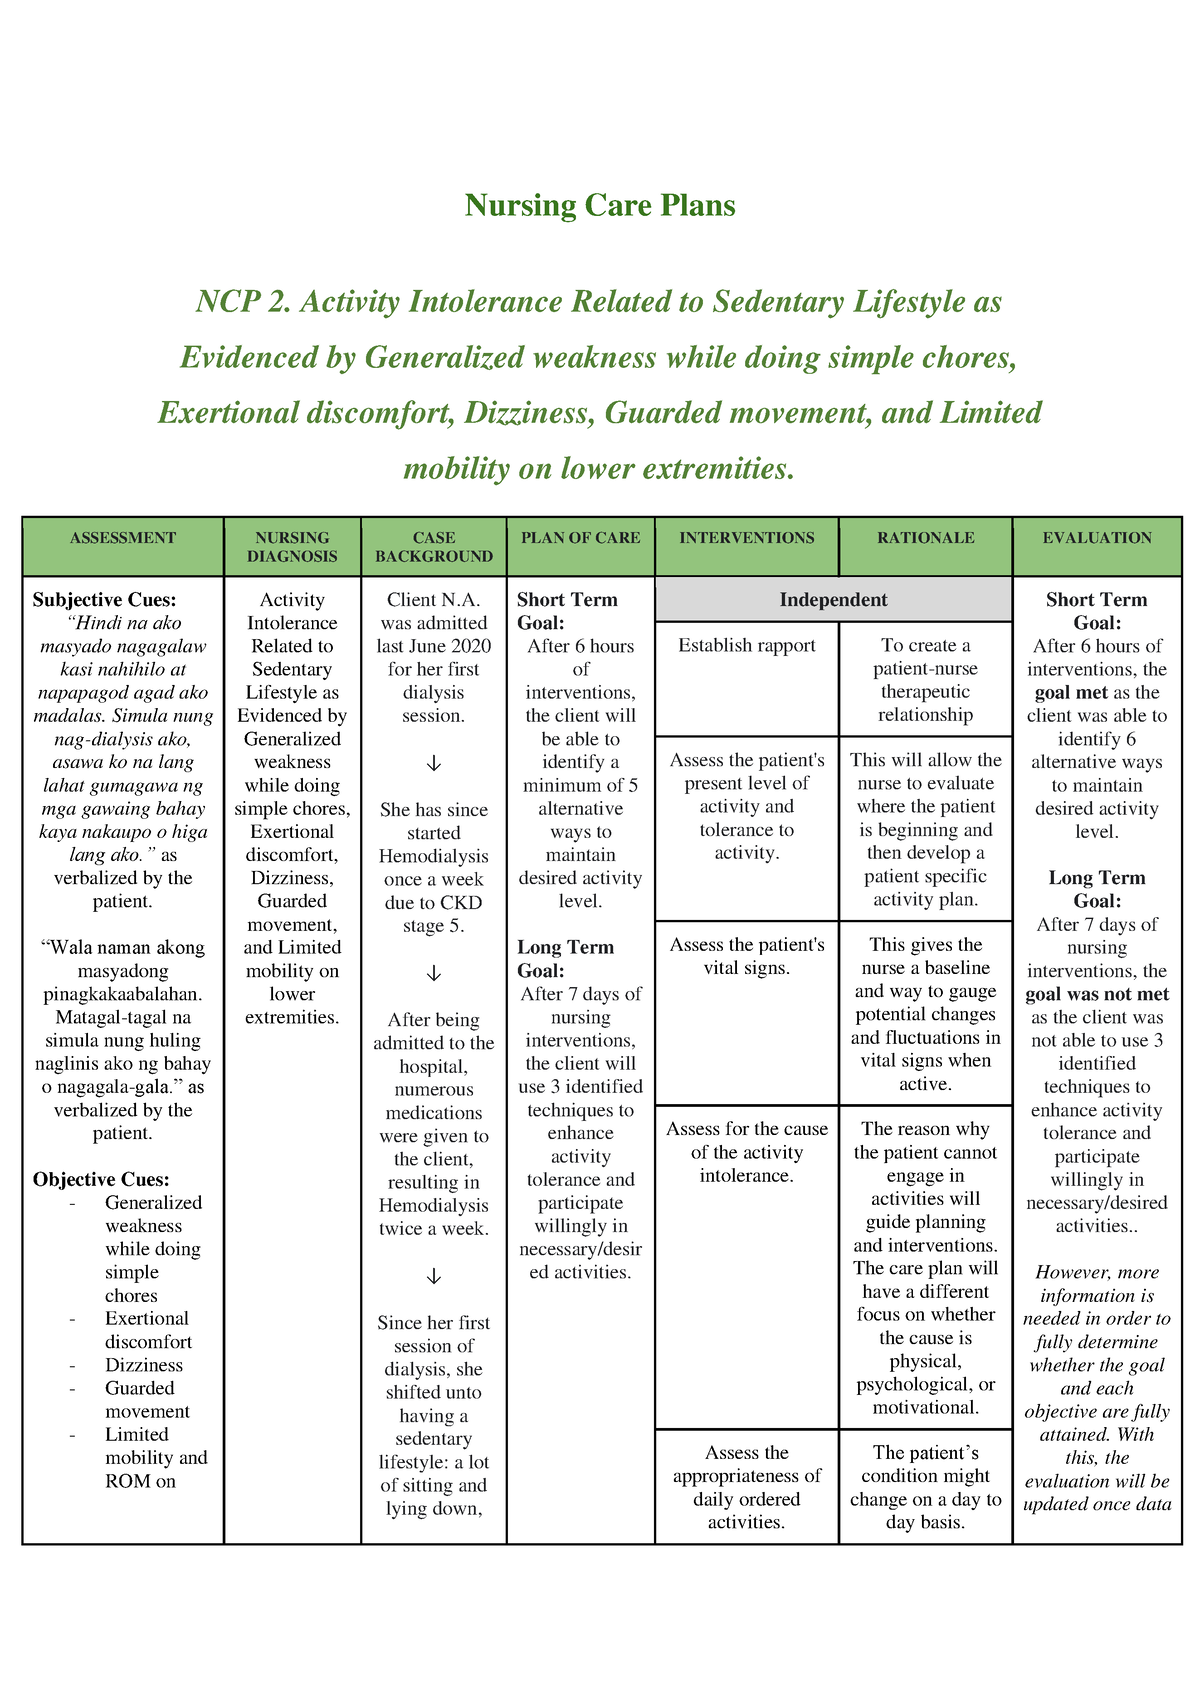 Nursing Care Plan Of Activity Intolerance Related To Sedentary